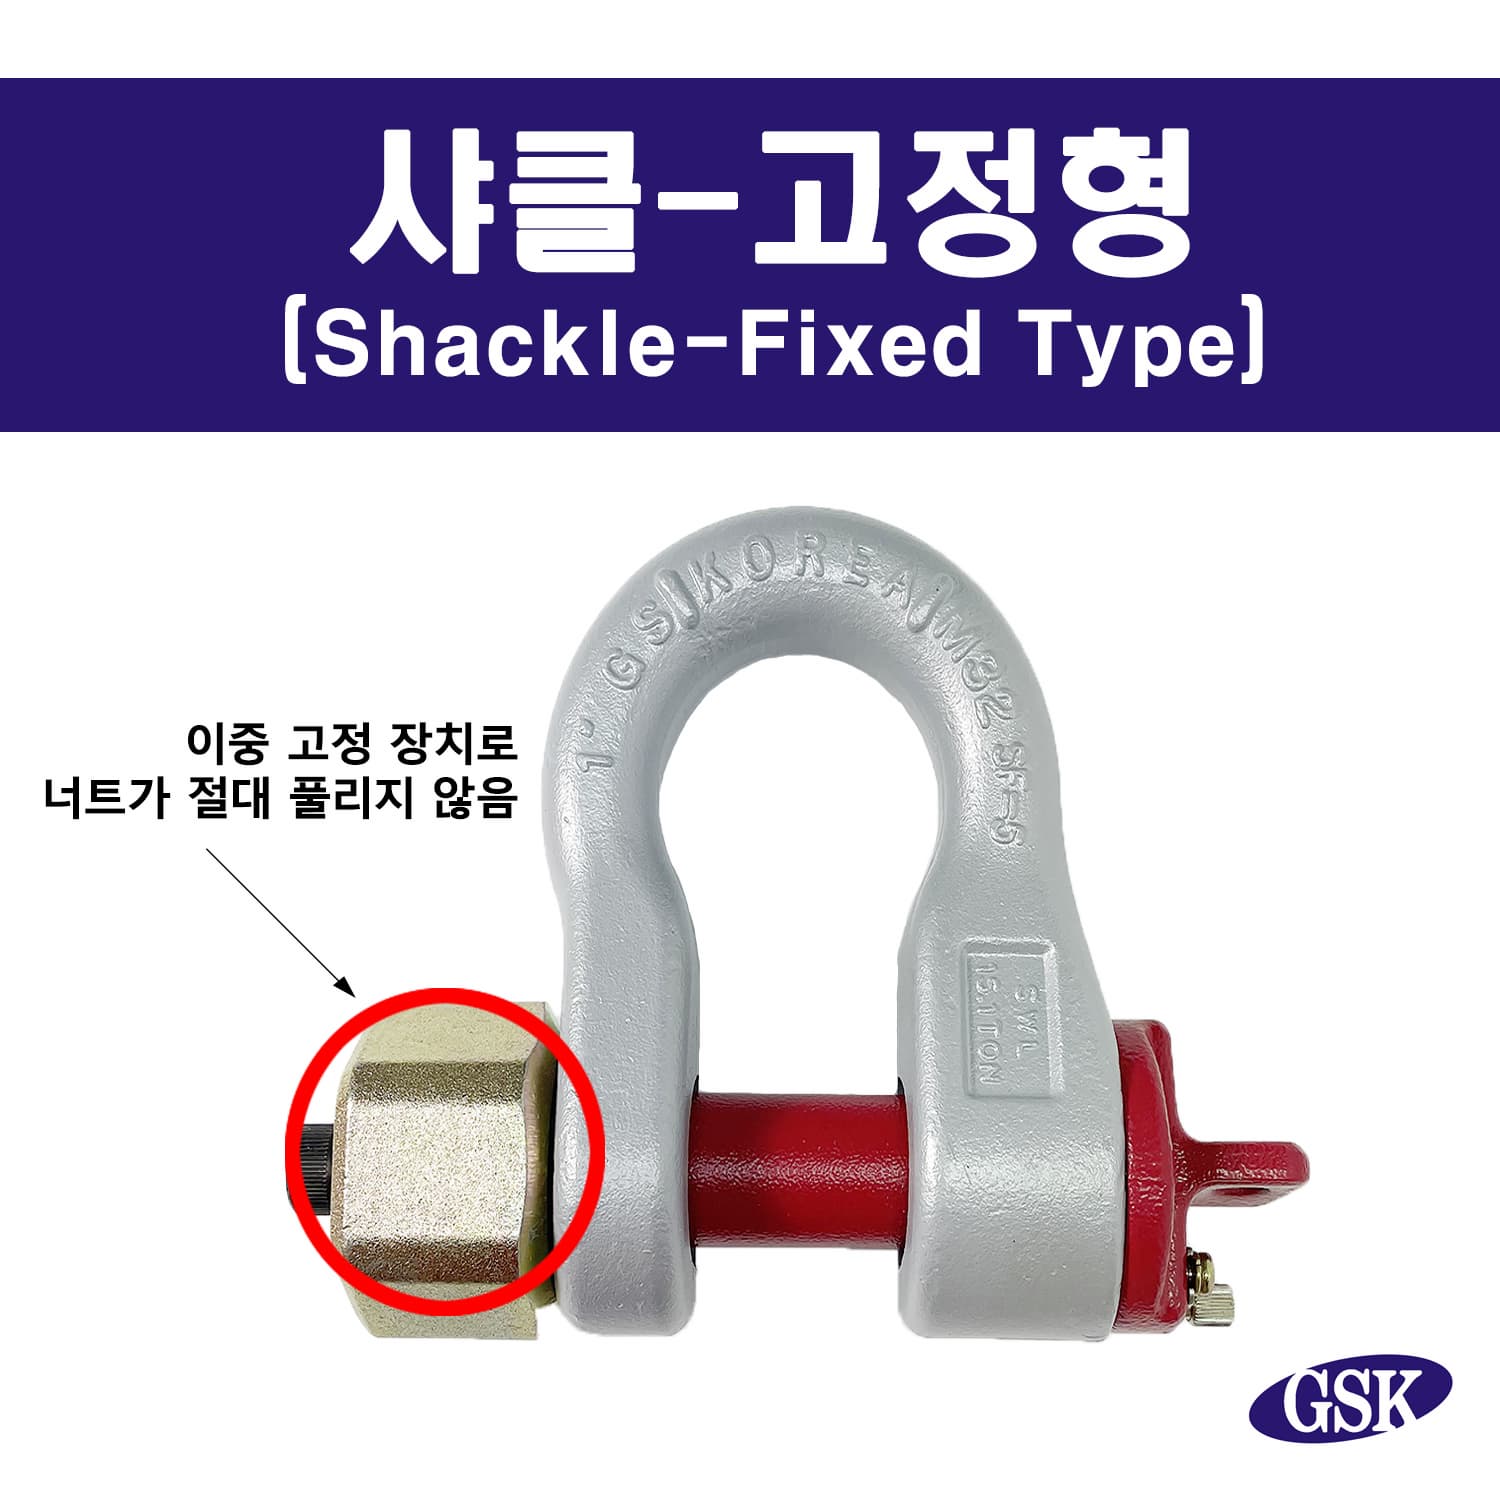 GSK SHACKLE 2_STAGE FIXED SHACKLE_Shackle_Fixed Type_